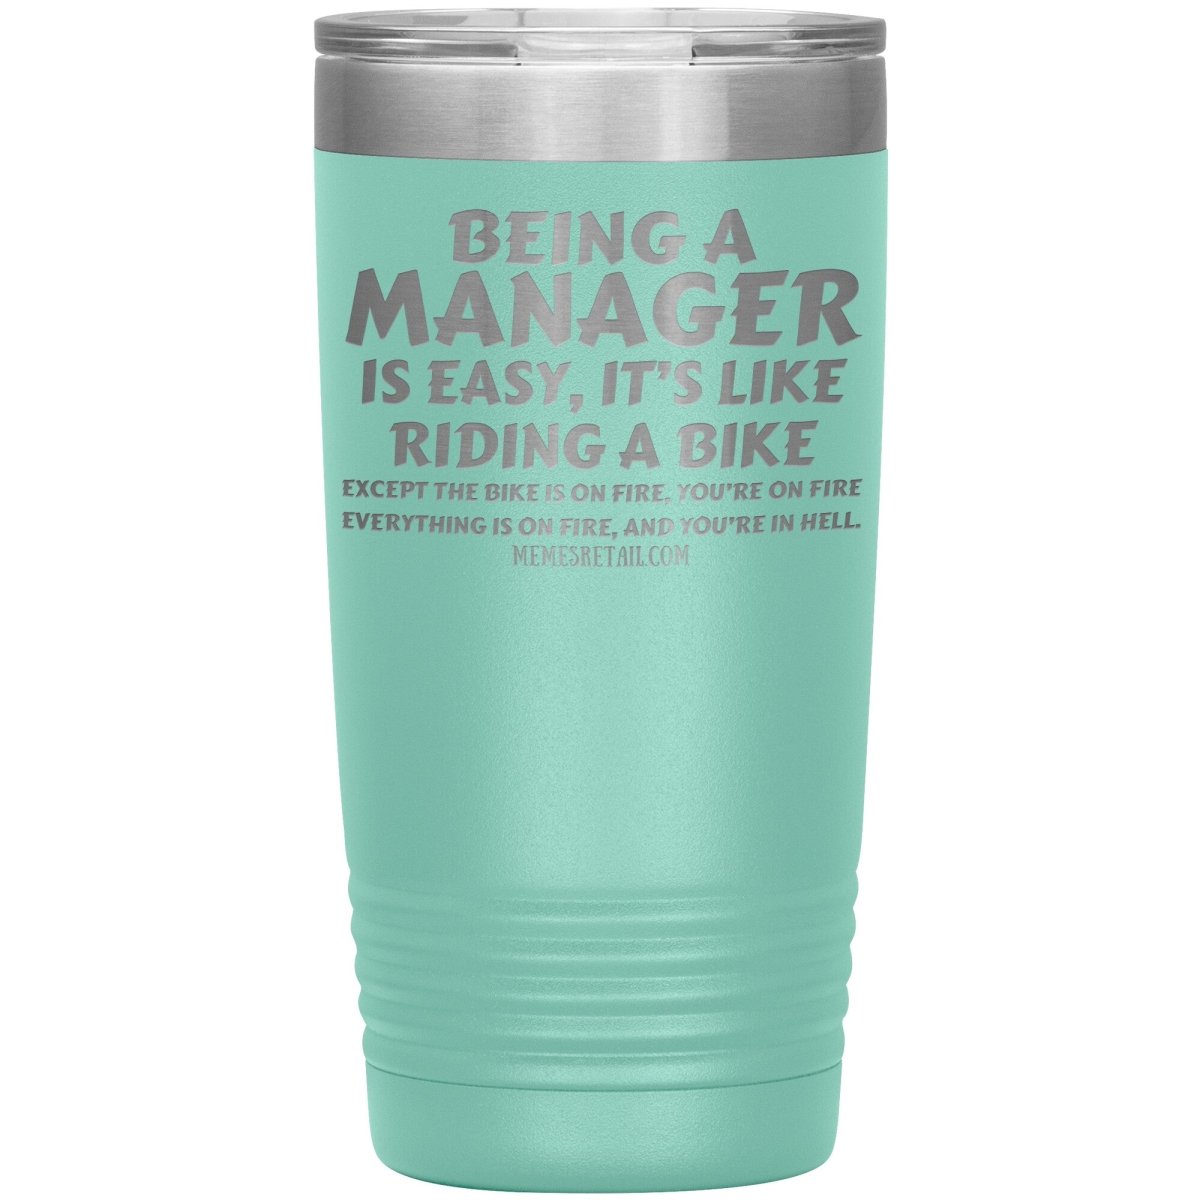 Being a manager is easy Tumblers, 20oz Insulated Tumbler / Teal - MemesRetail.com